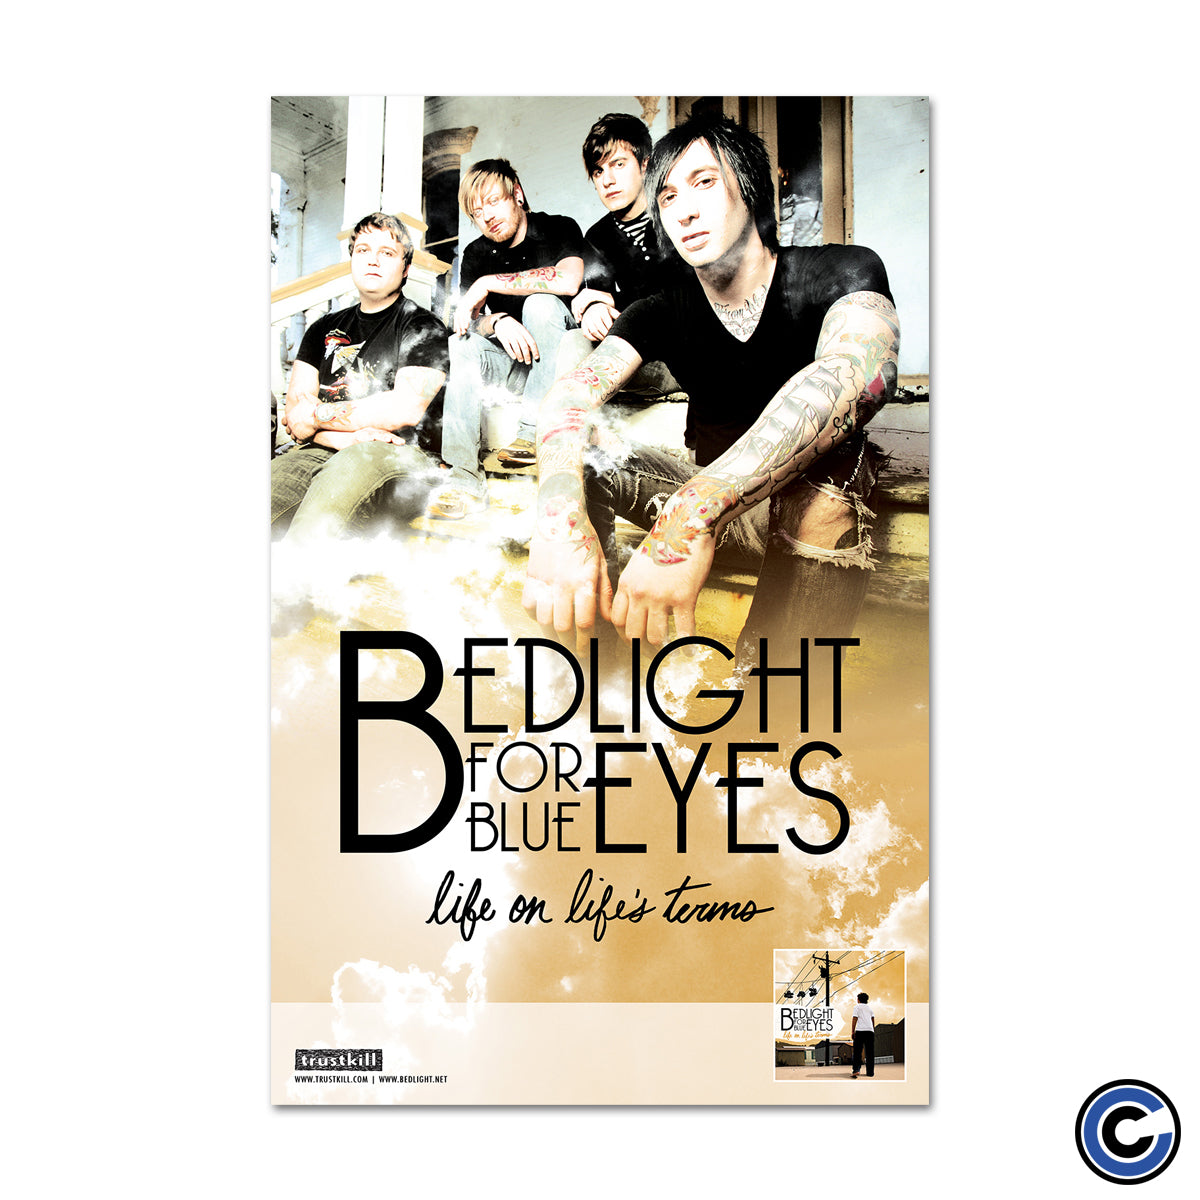 Bedlight For Blue Eyes "Life On Life's Terms" Poster